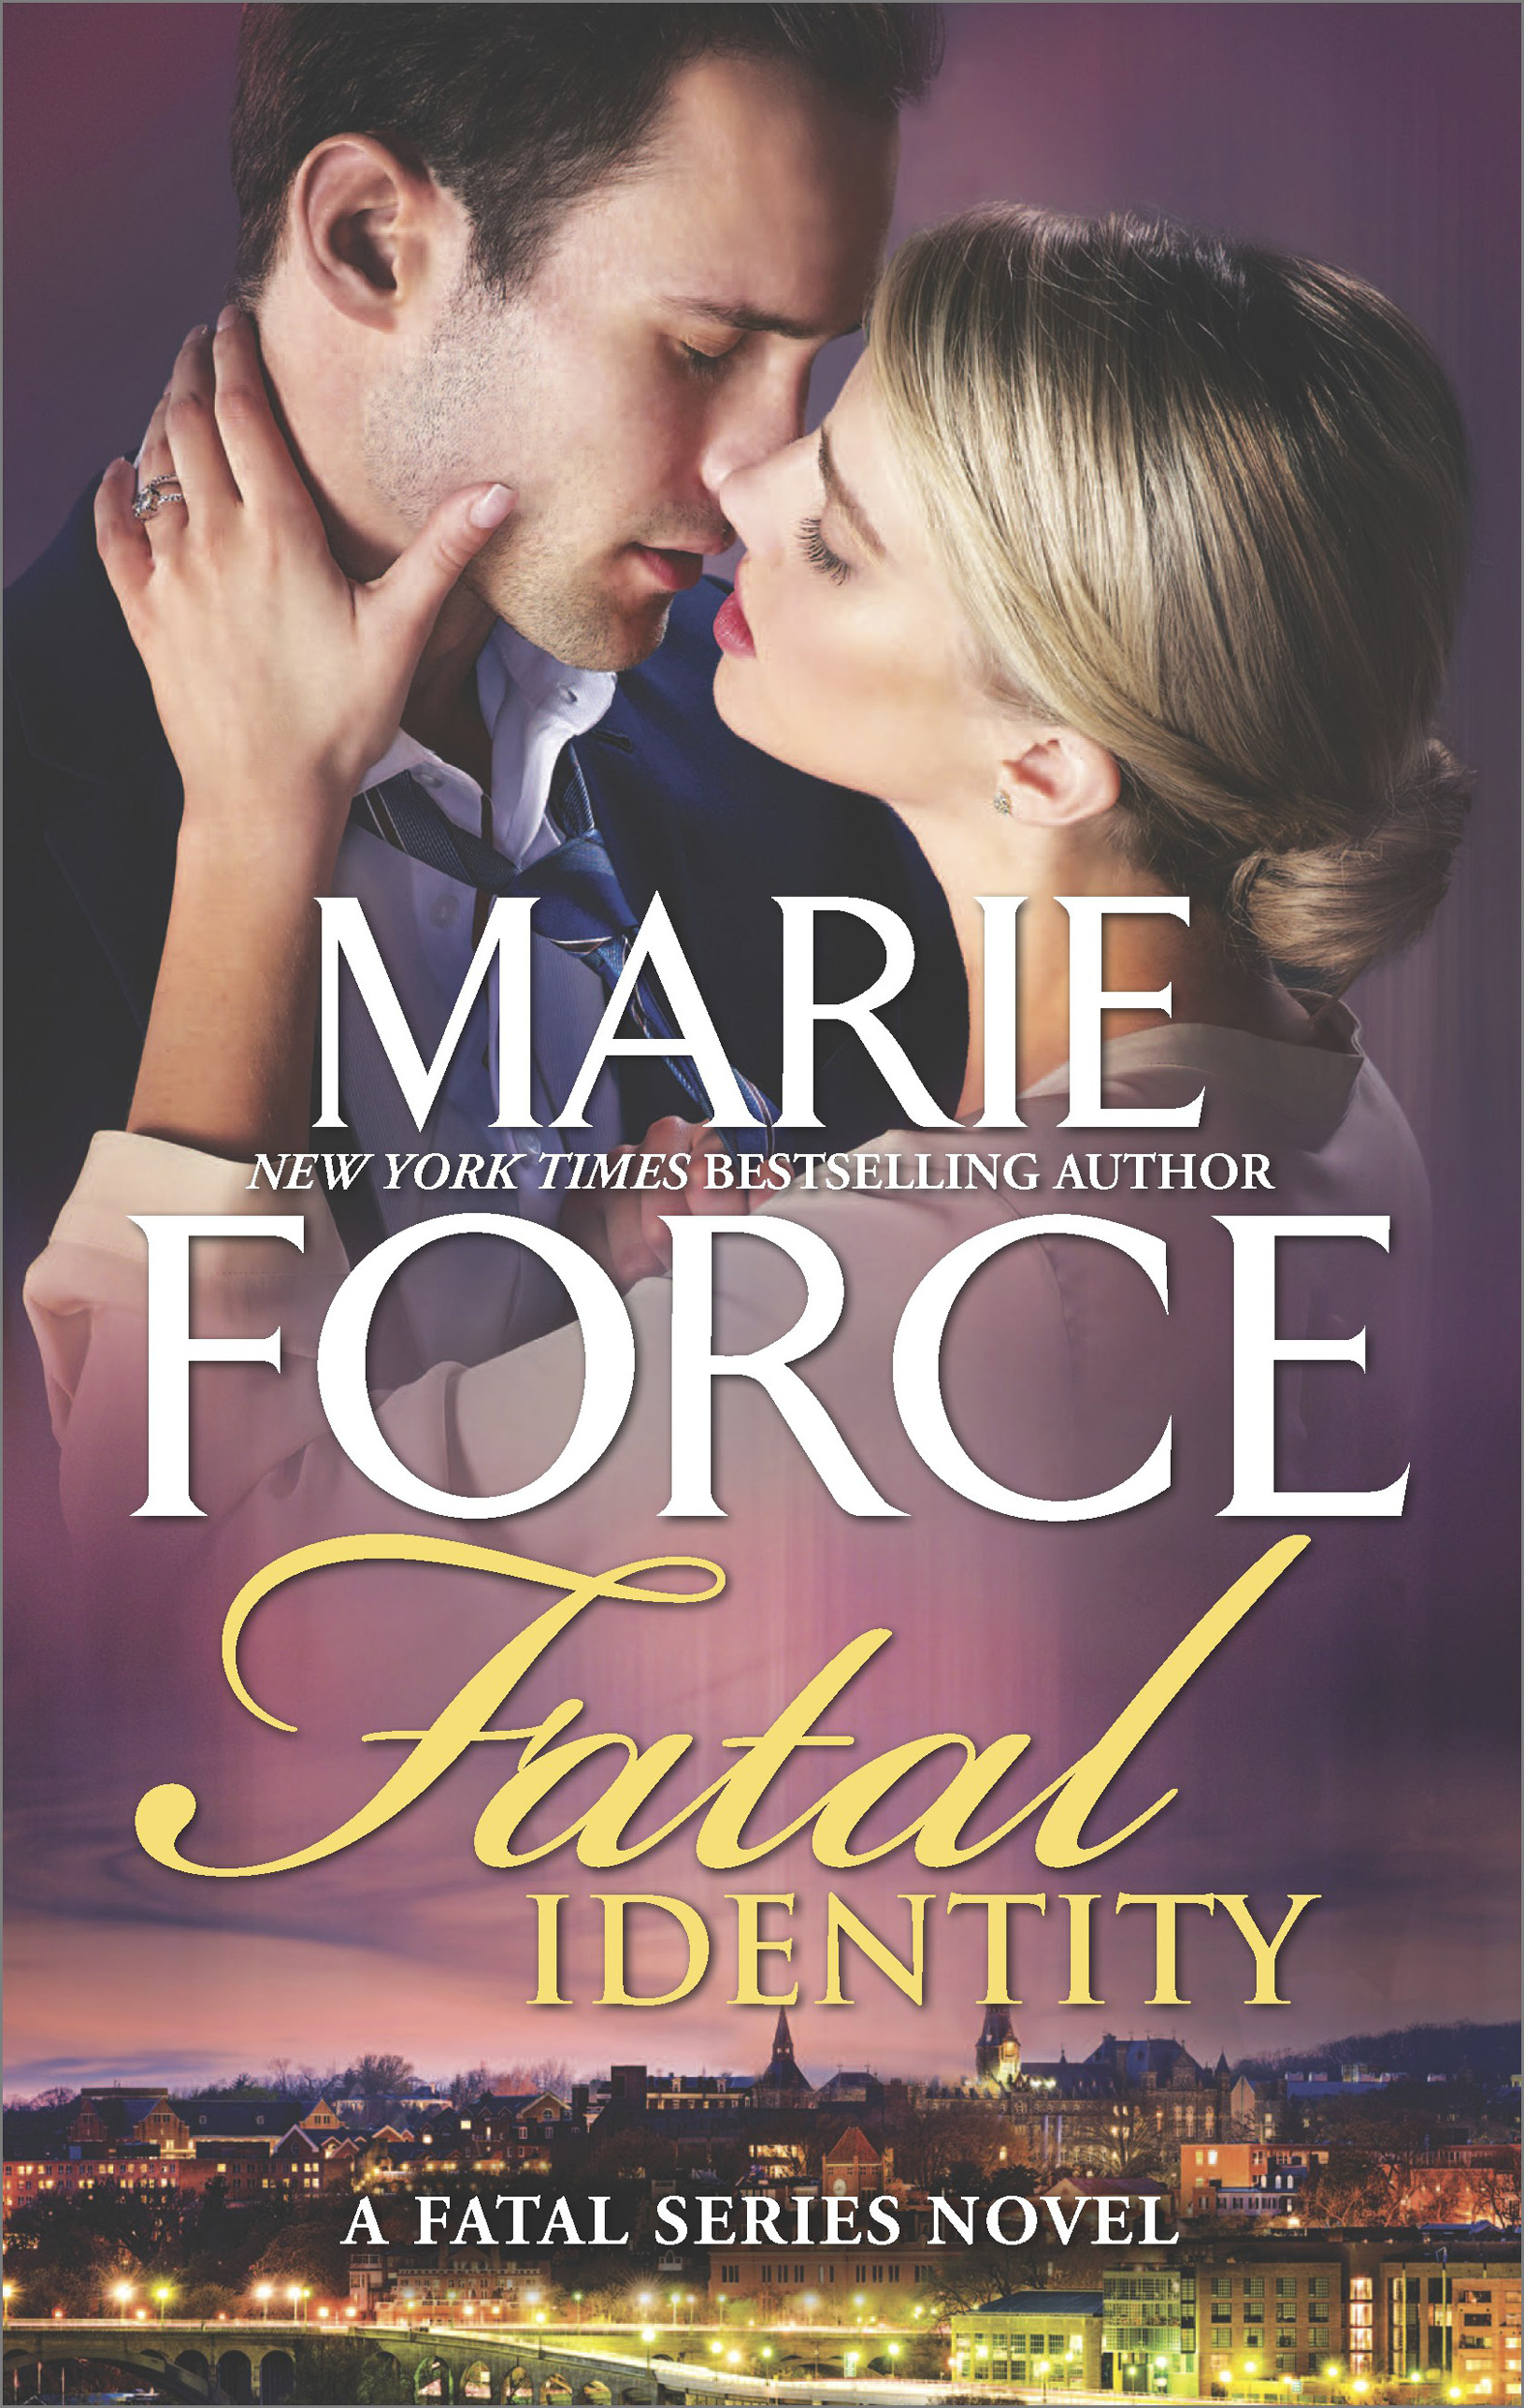 Fatal Identity (2016) by Marie Force